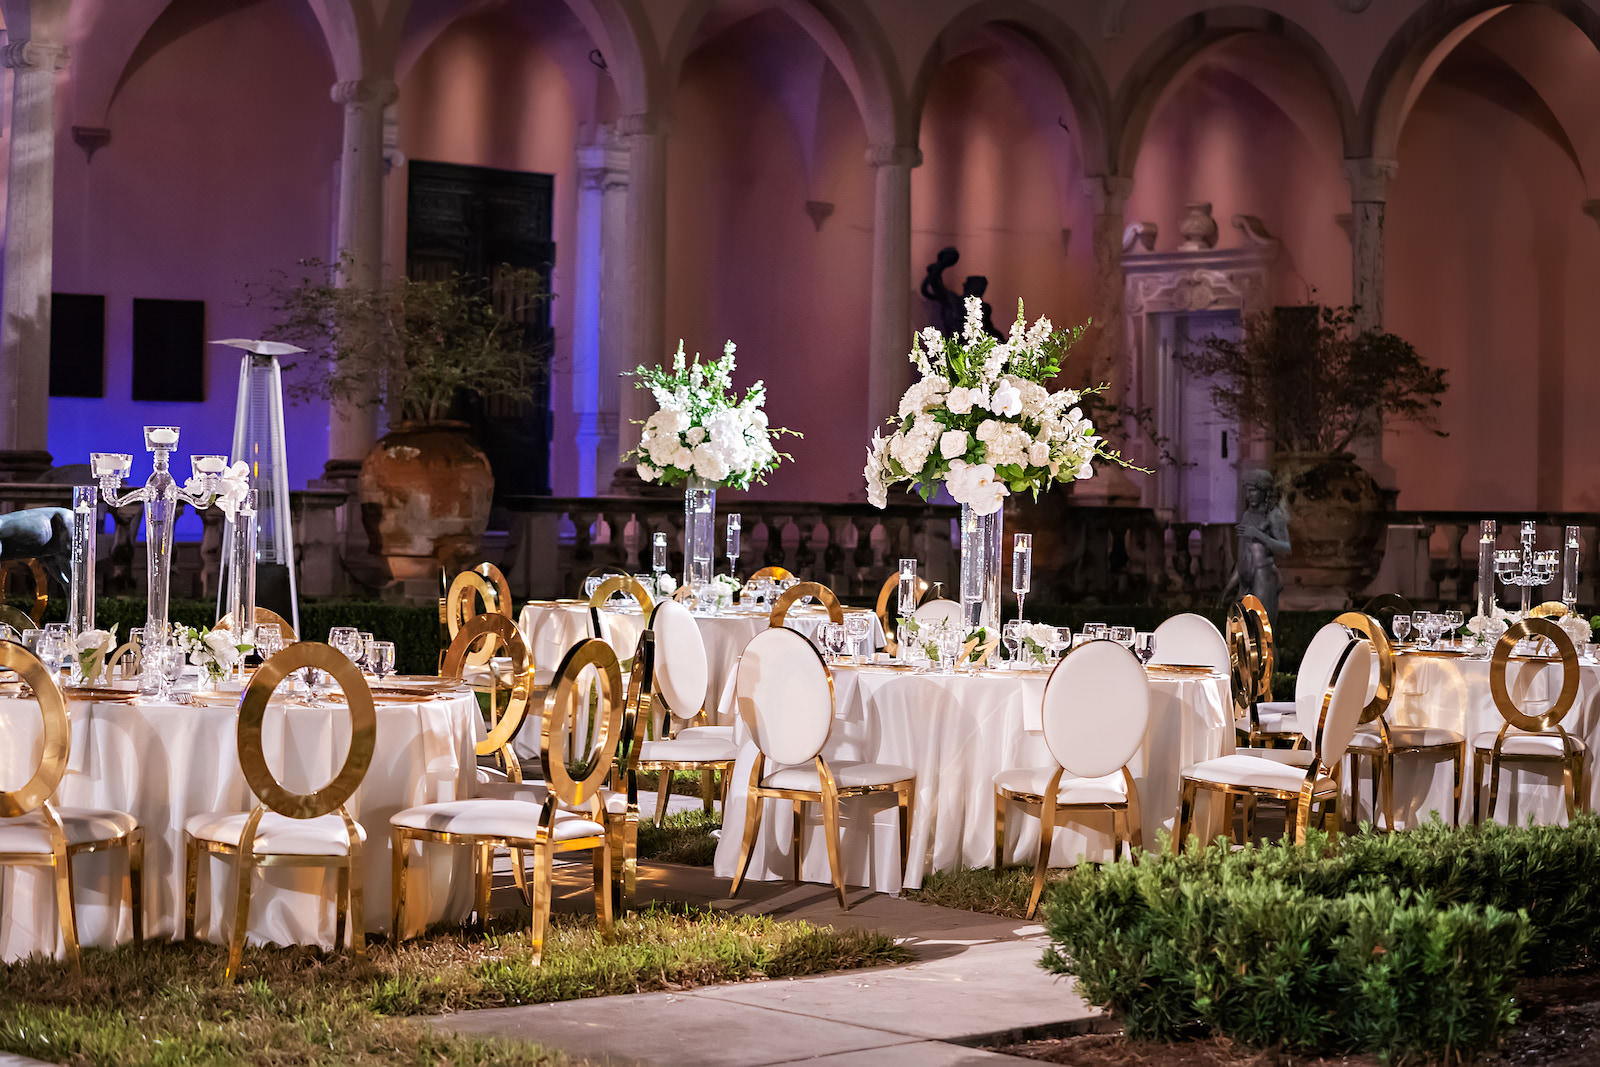 Luxurious Modern Chic Courtyard Wedding Reception Courtyard Wedding Decor, Purple Uplighting, Gold and White Chairs, Black and White Checkered Dance Floor | Tampa Bay Wedding Photographer Limelight Photographer | Sarasota Wedding Venue Ringling Museum